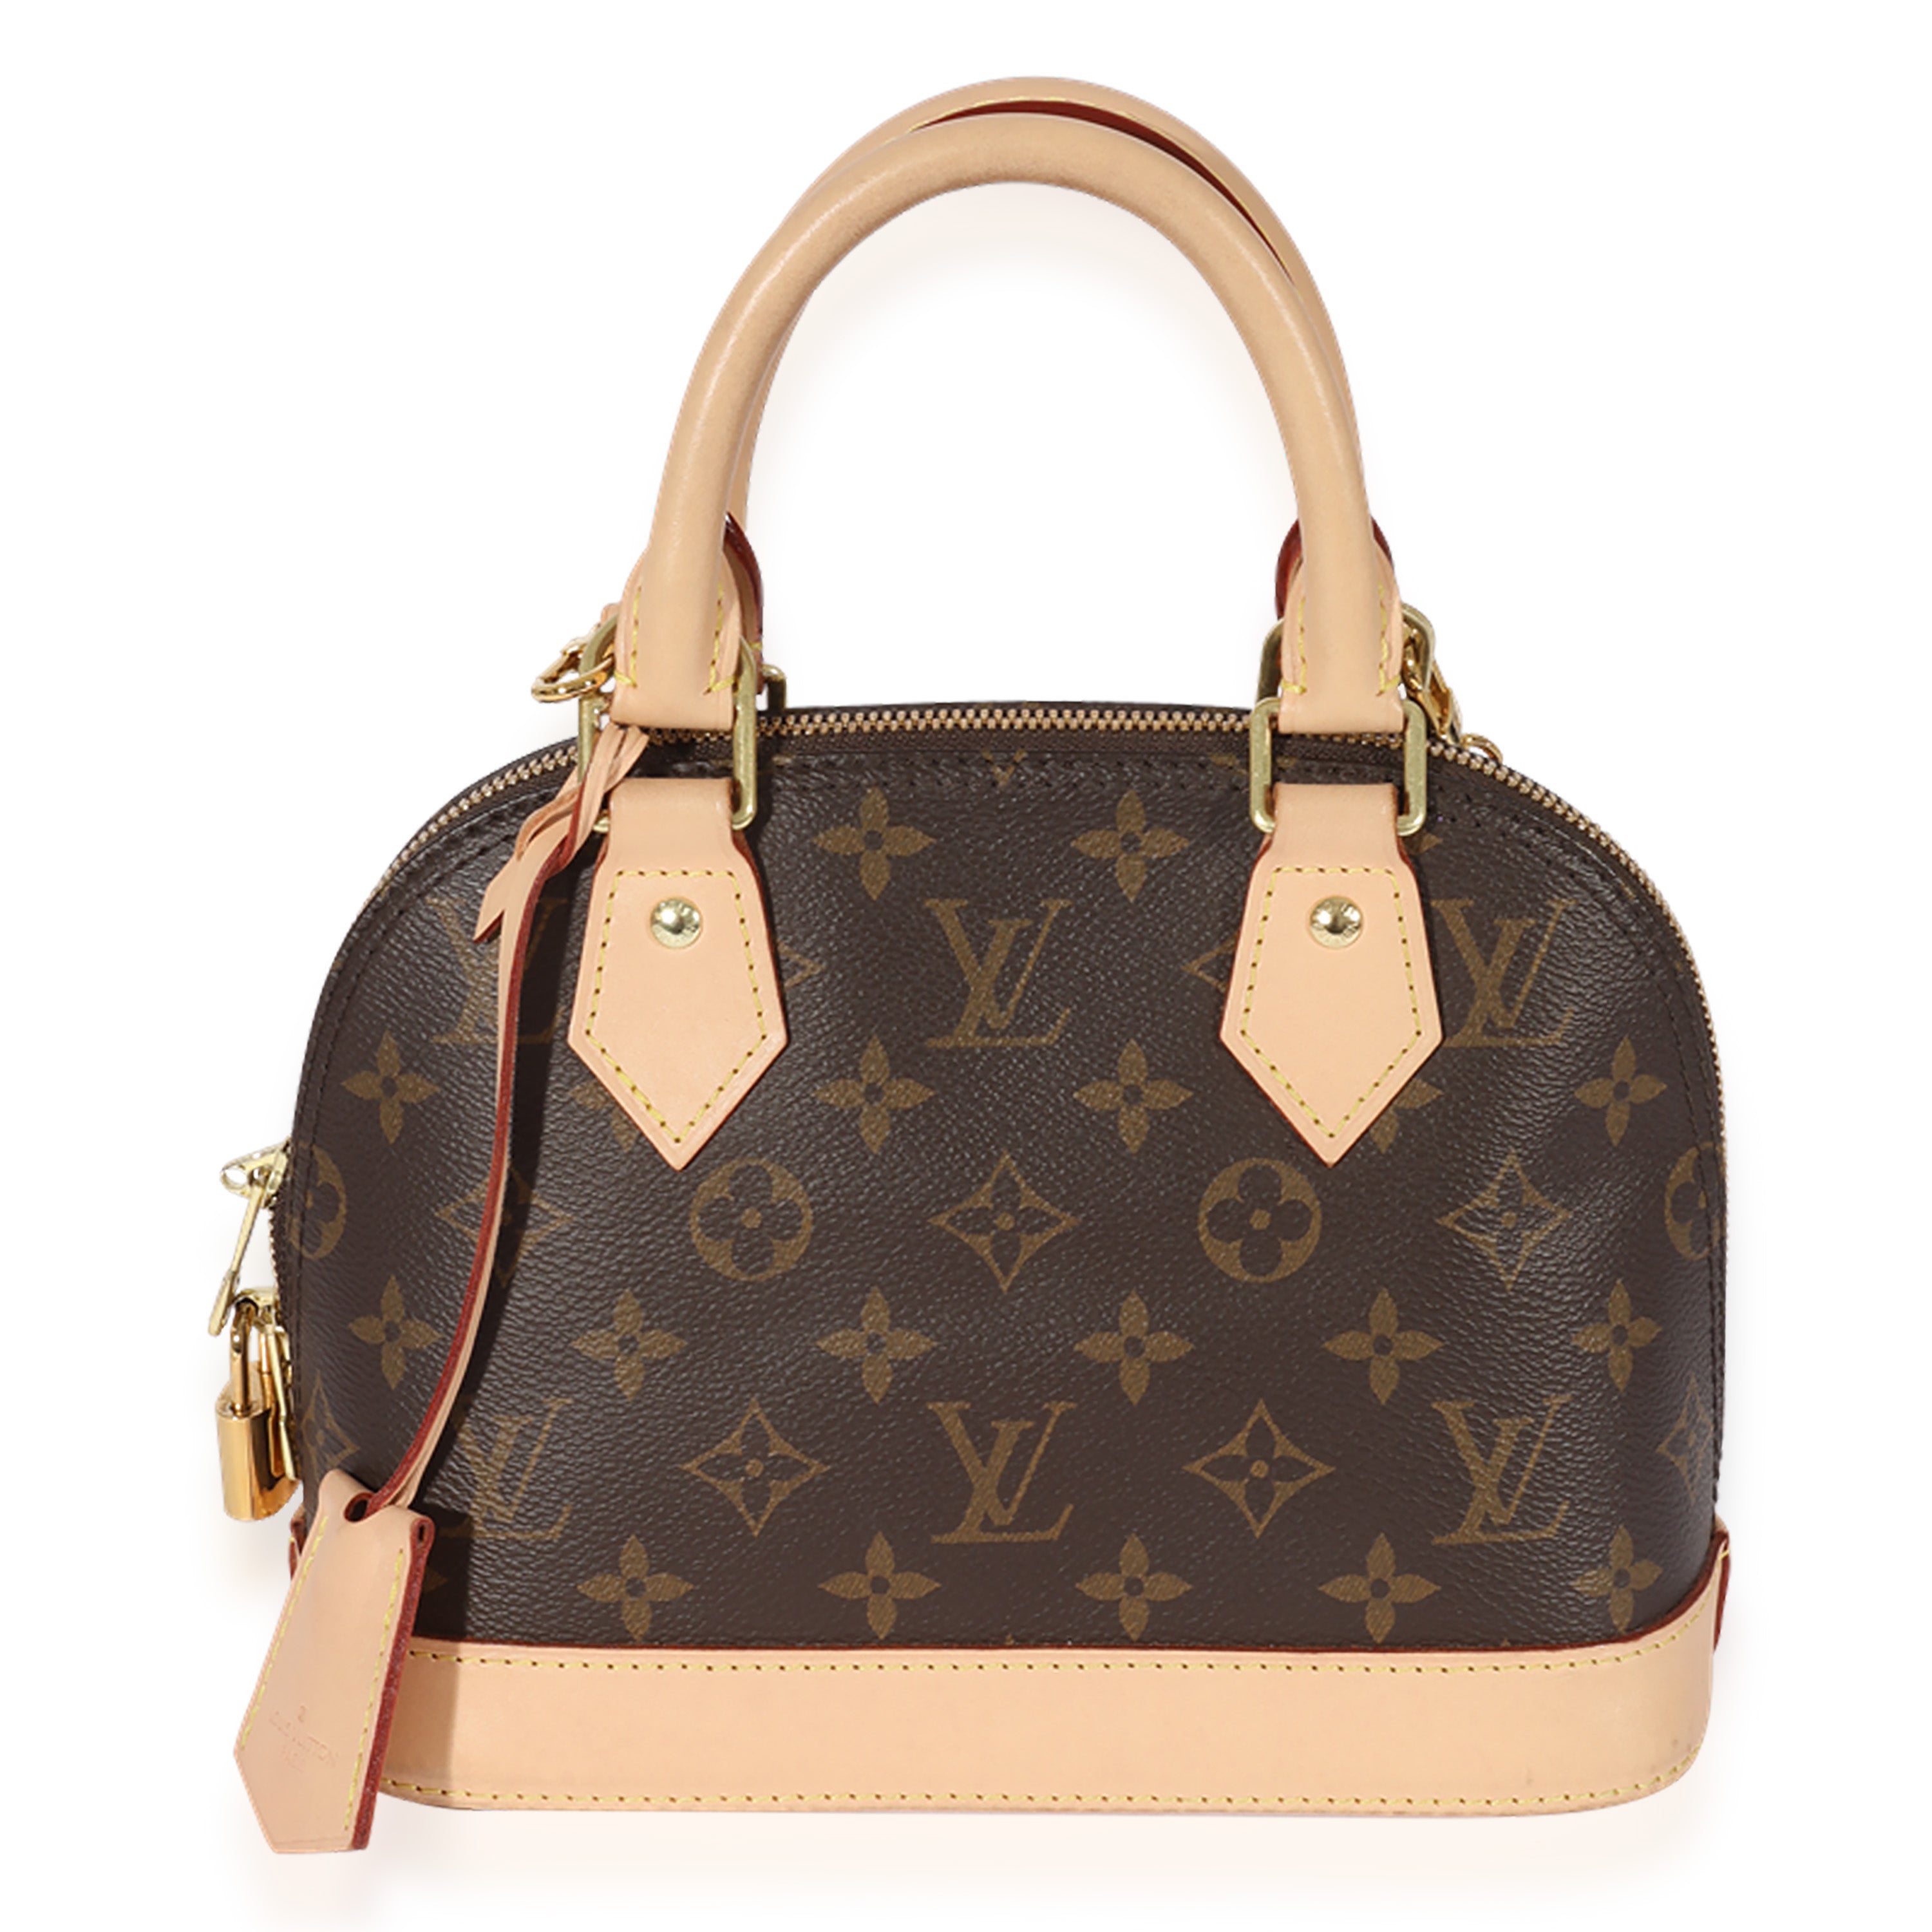 What You Need to Know Before Buying Your First Louis Vuitton Bag - Alma BB  Review